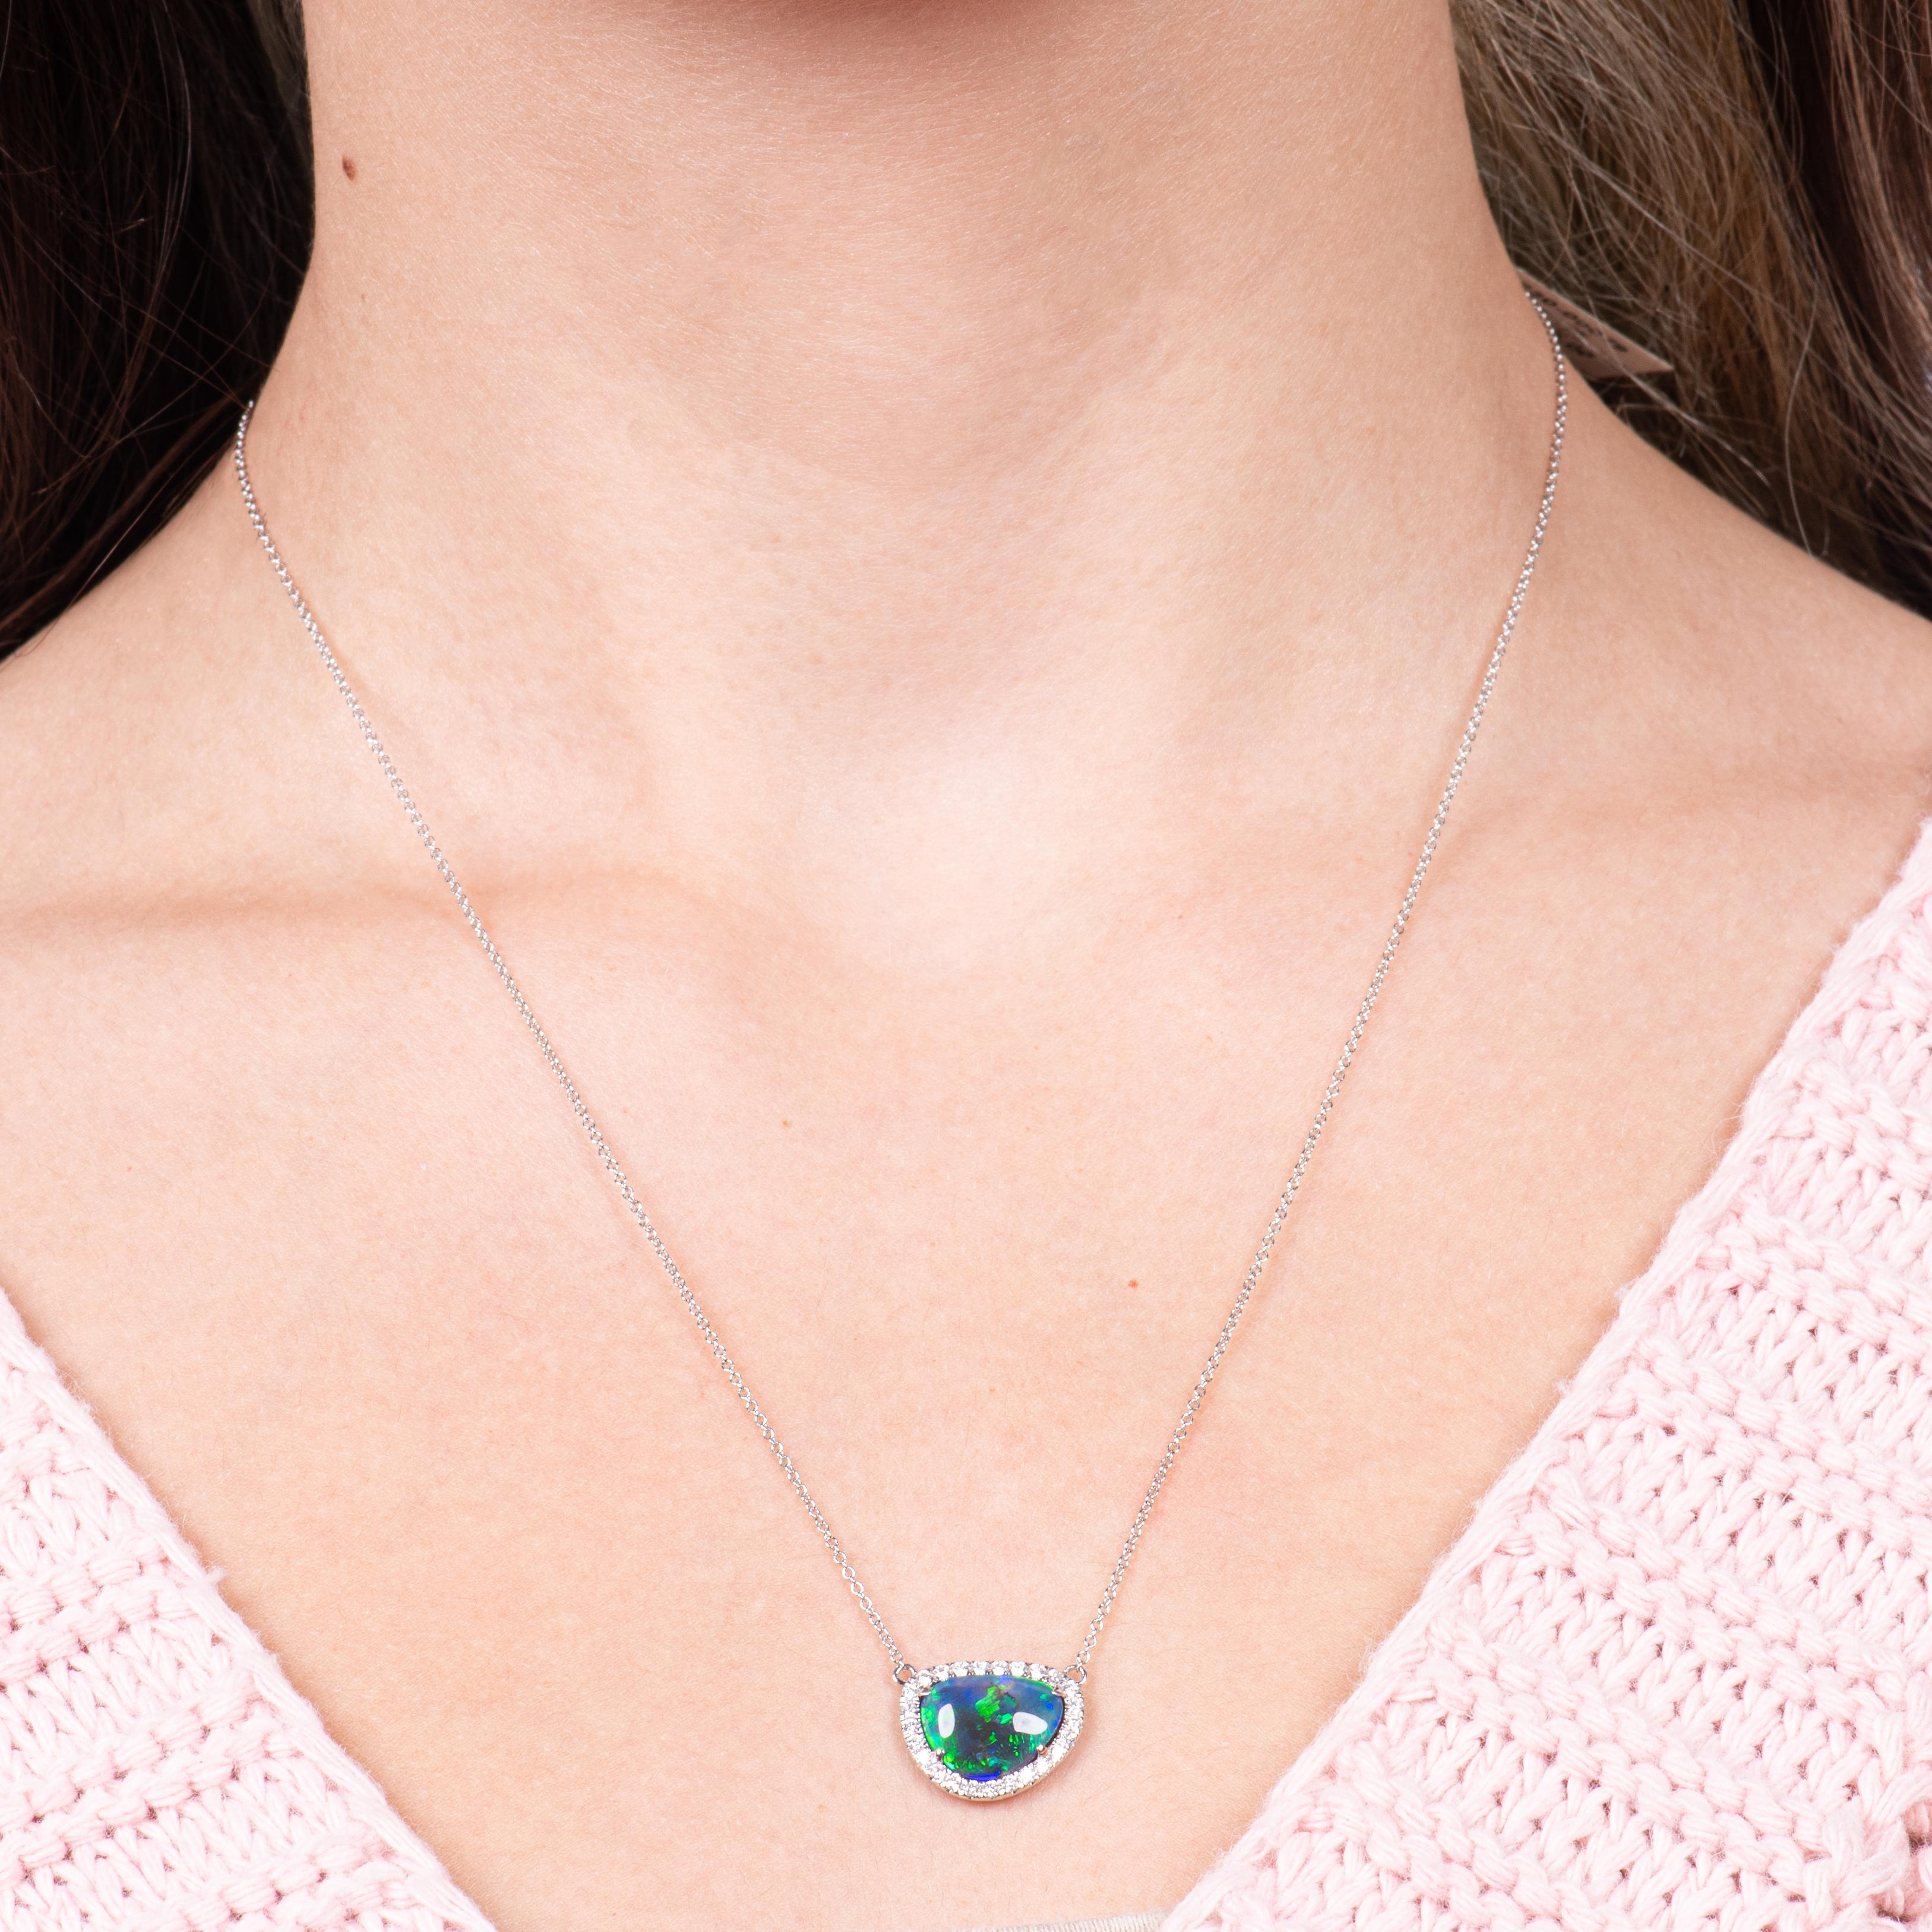 This pendant features a 3.35ct Lightning Ridge Australian blue/green opal, surrounded by a 0.27ctw diamond halo, set in 18kt white gold.